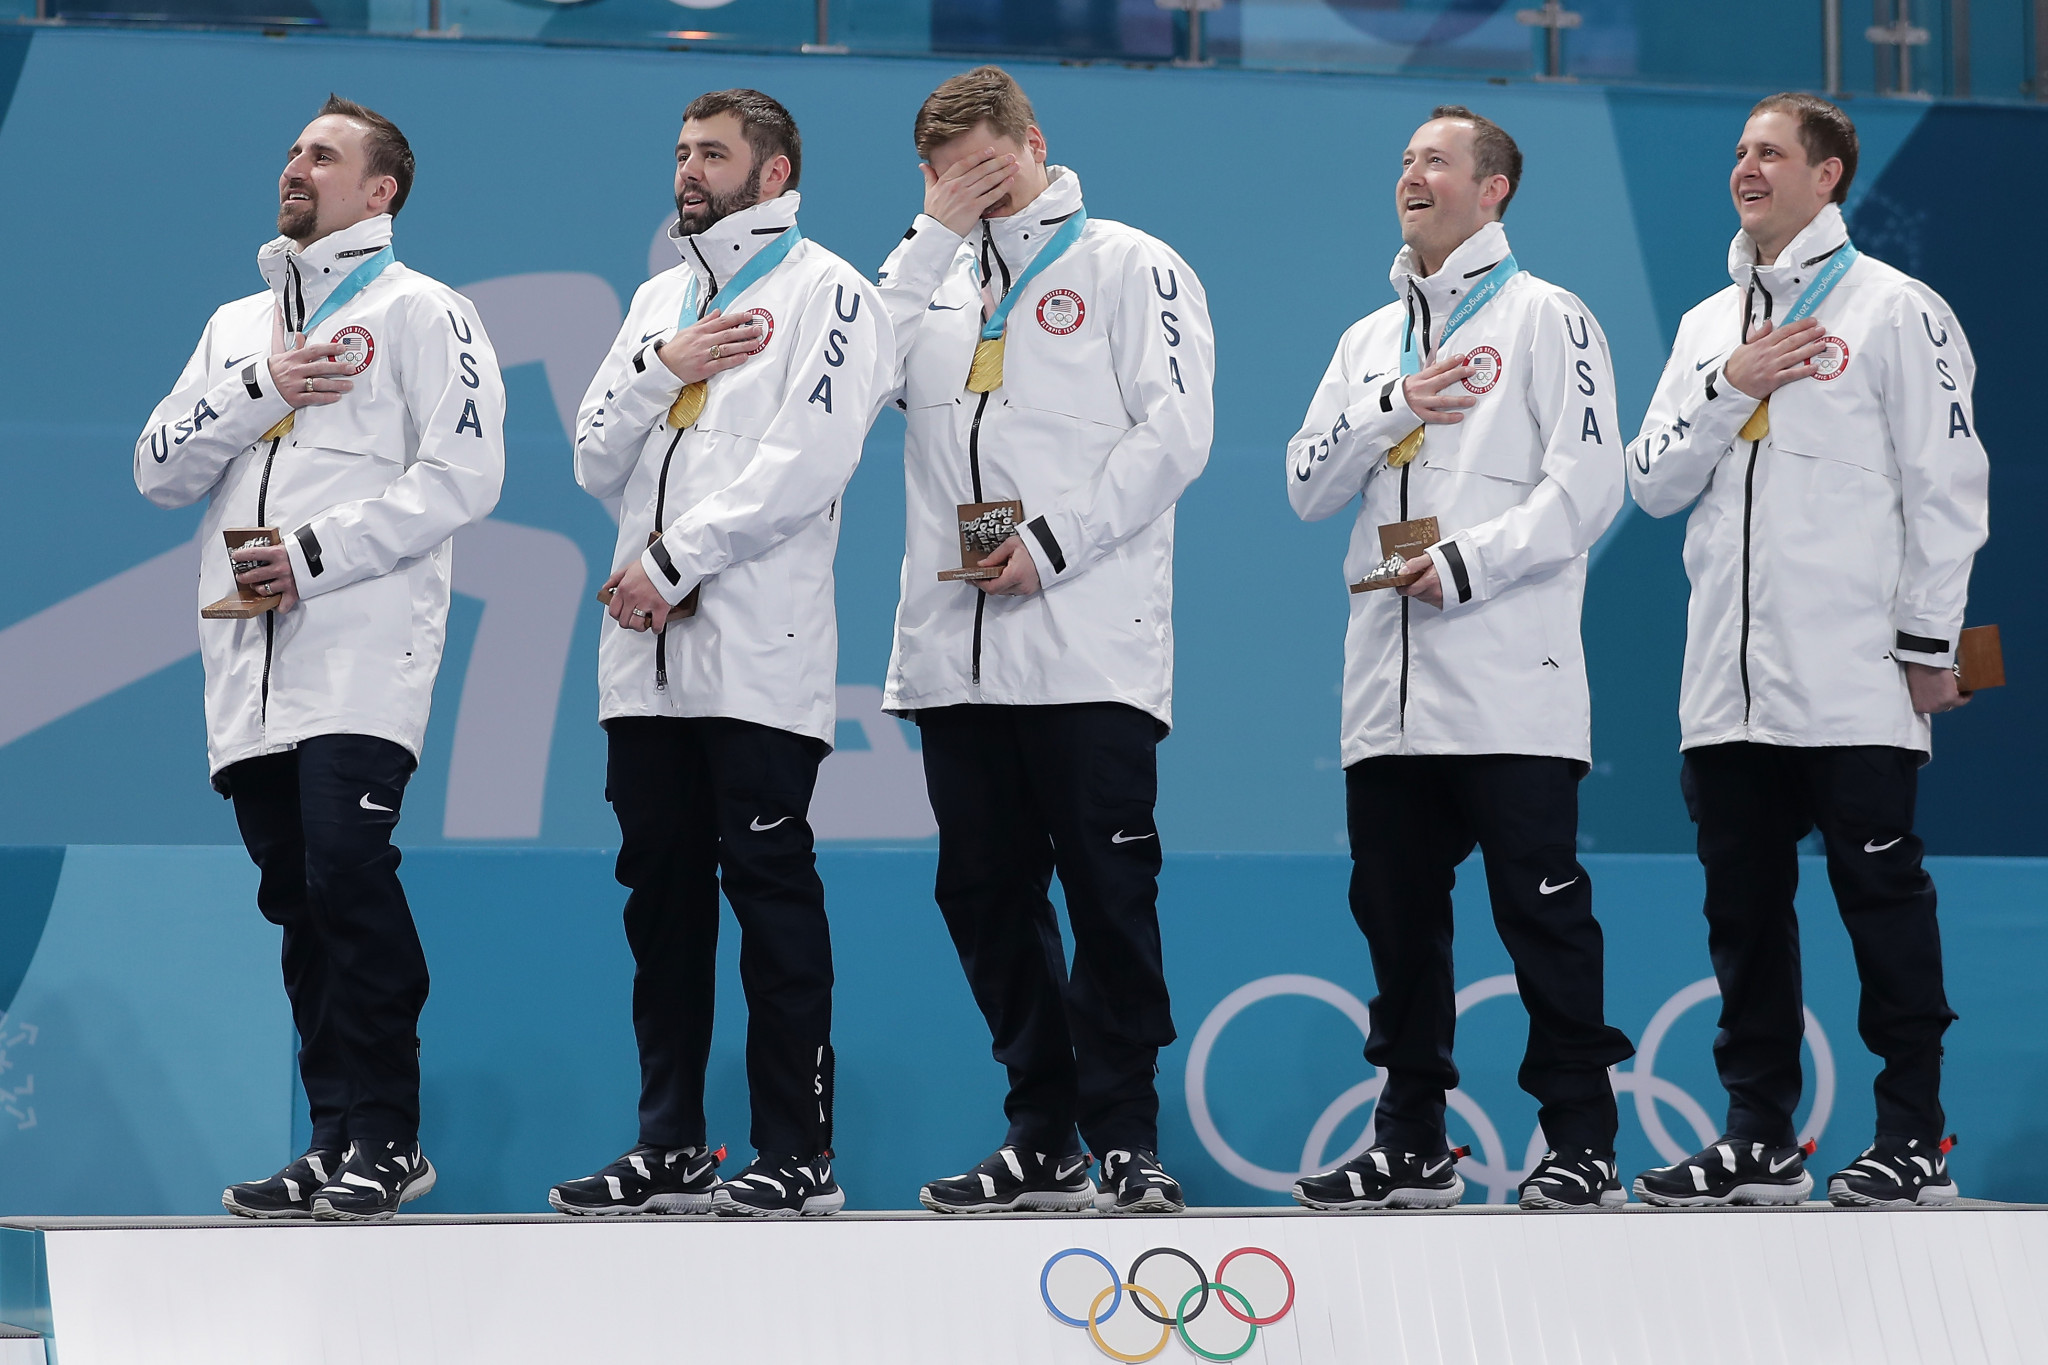 United States claim historic Olympic curling crown on day 15 of Pyeongchang 2018